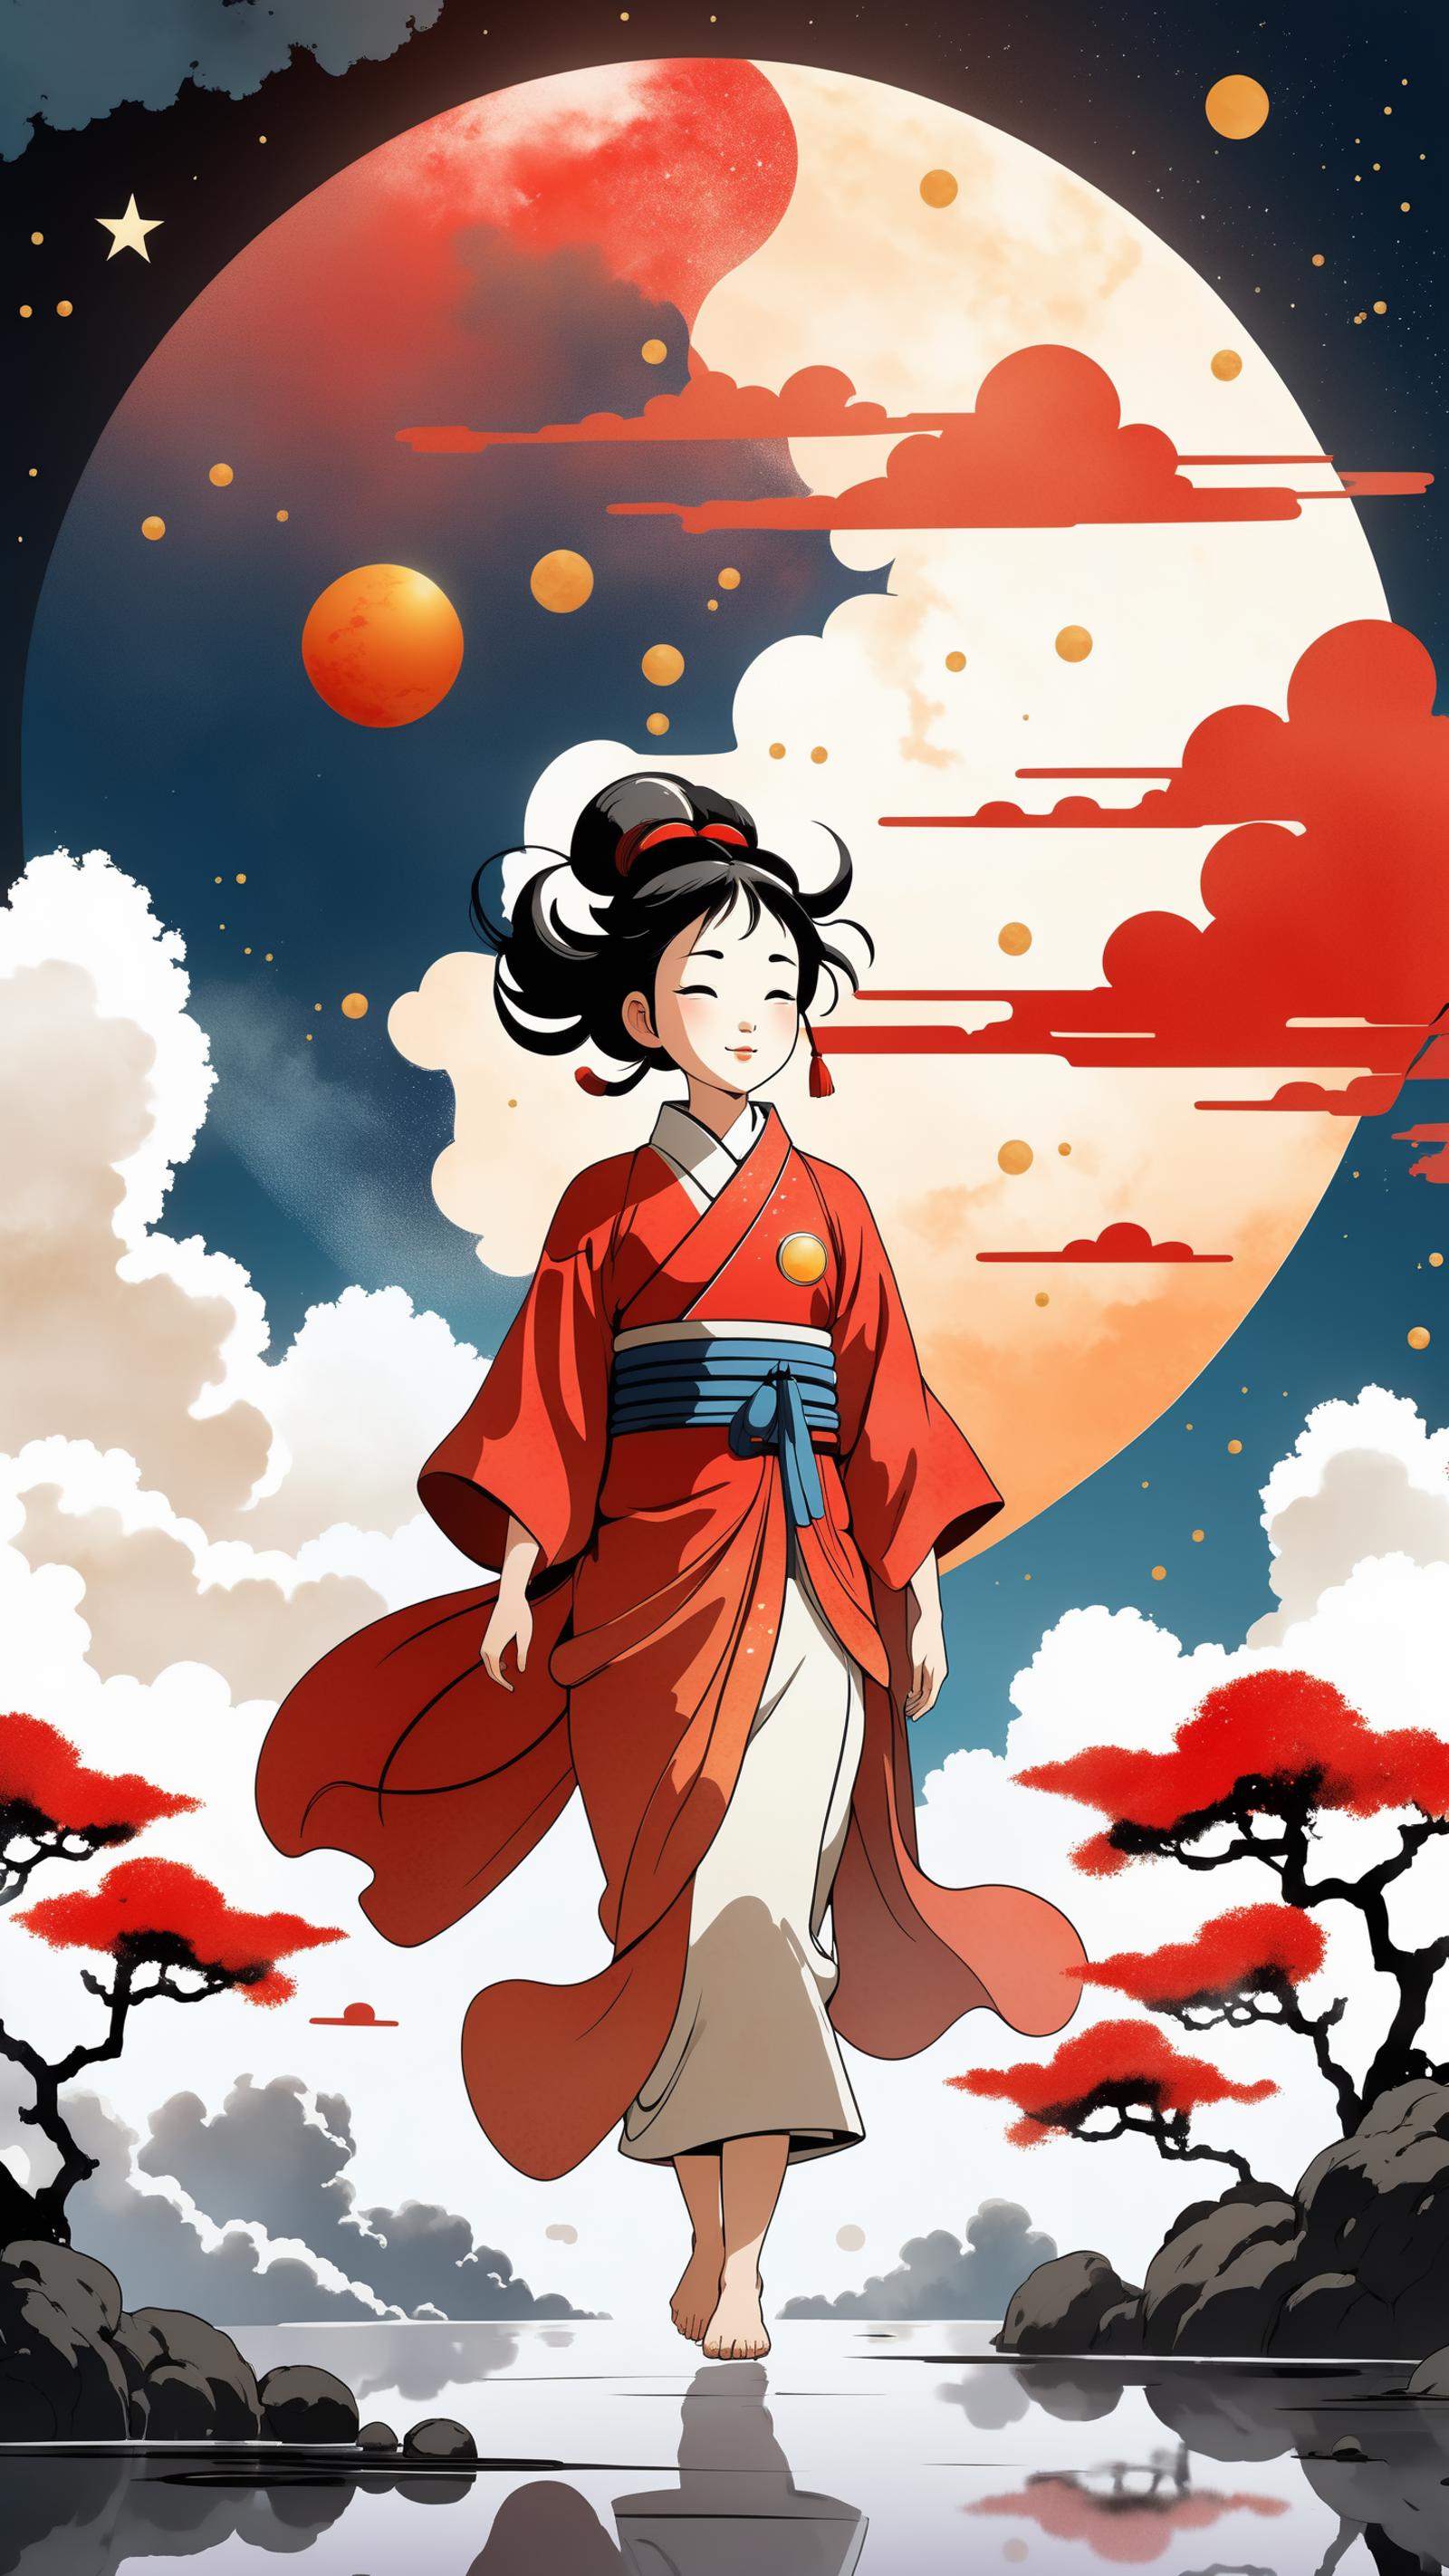 Asian Woman in a Kimono with Long Hair and a Red Ribbon, Walking on a Cloudy Night with a Moon in the Background.